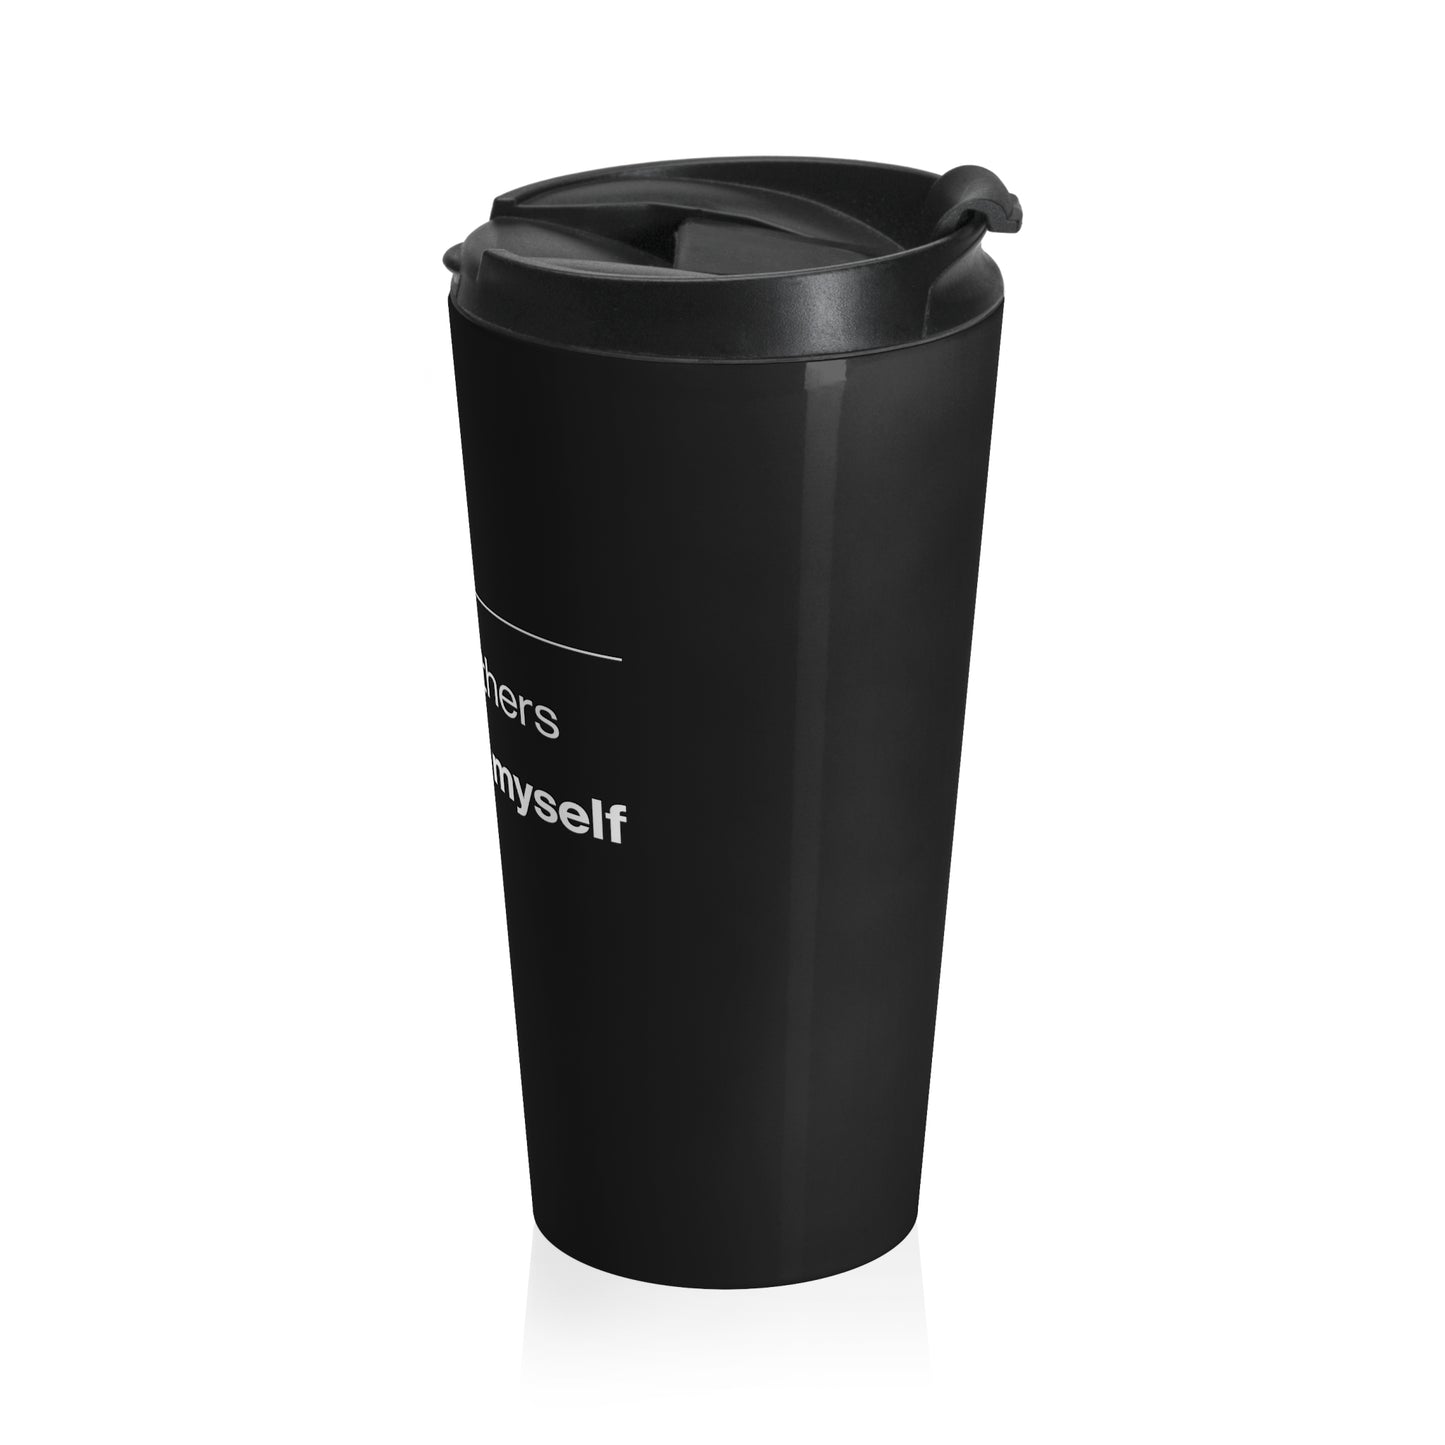 Me Before Others Stainless Steel Travel Mug